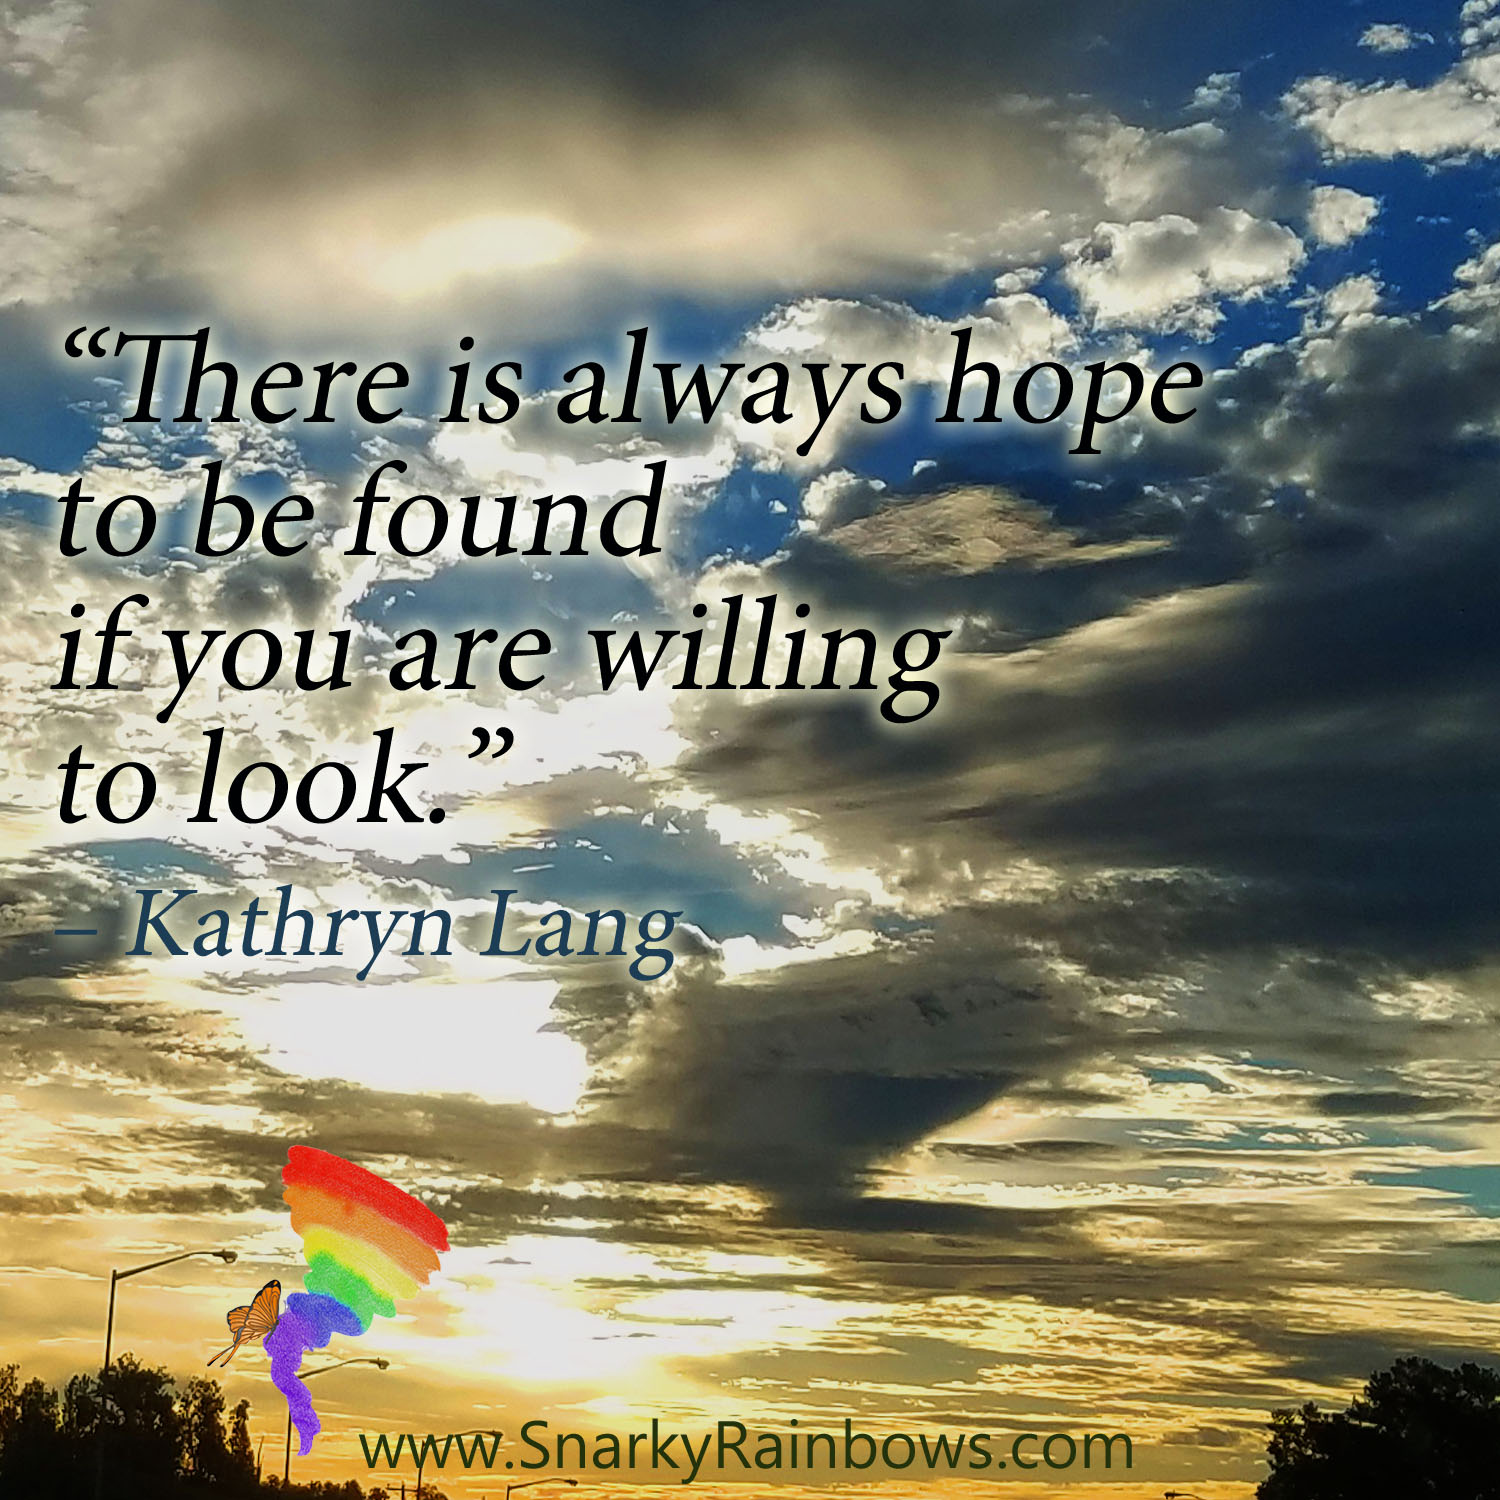 #QuoteoftheDay for December 6, 2019 - Willing to Look for Hope